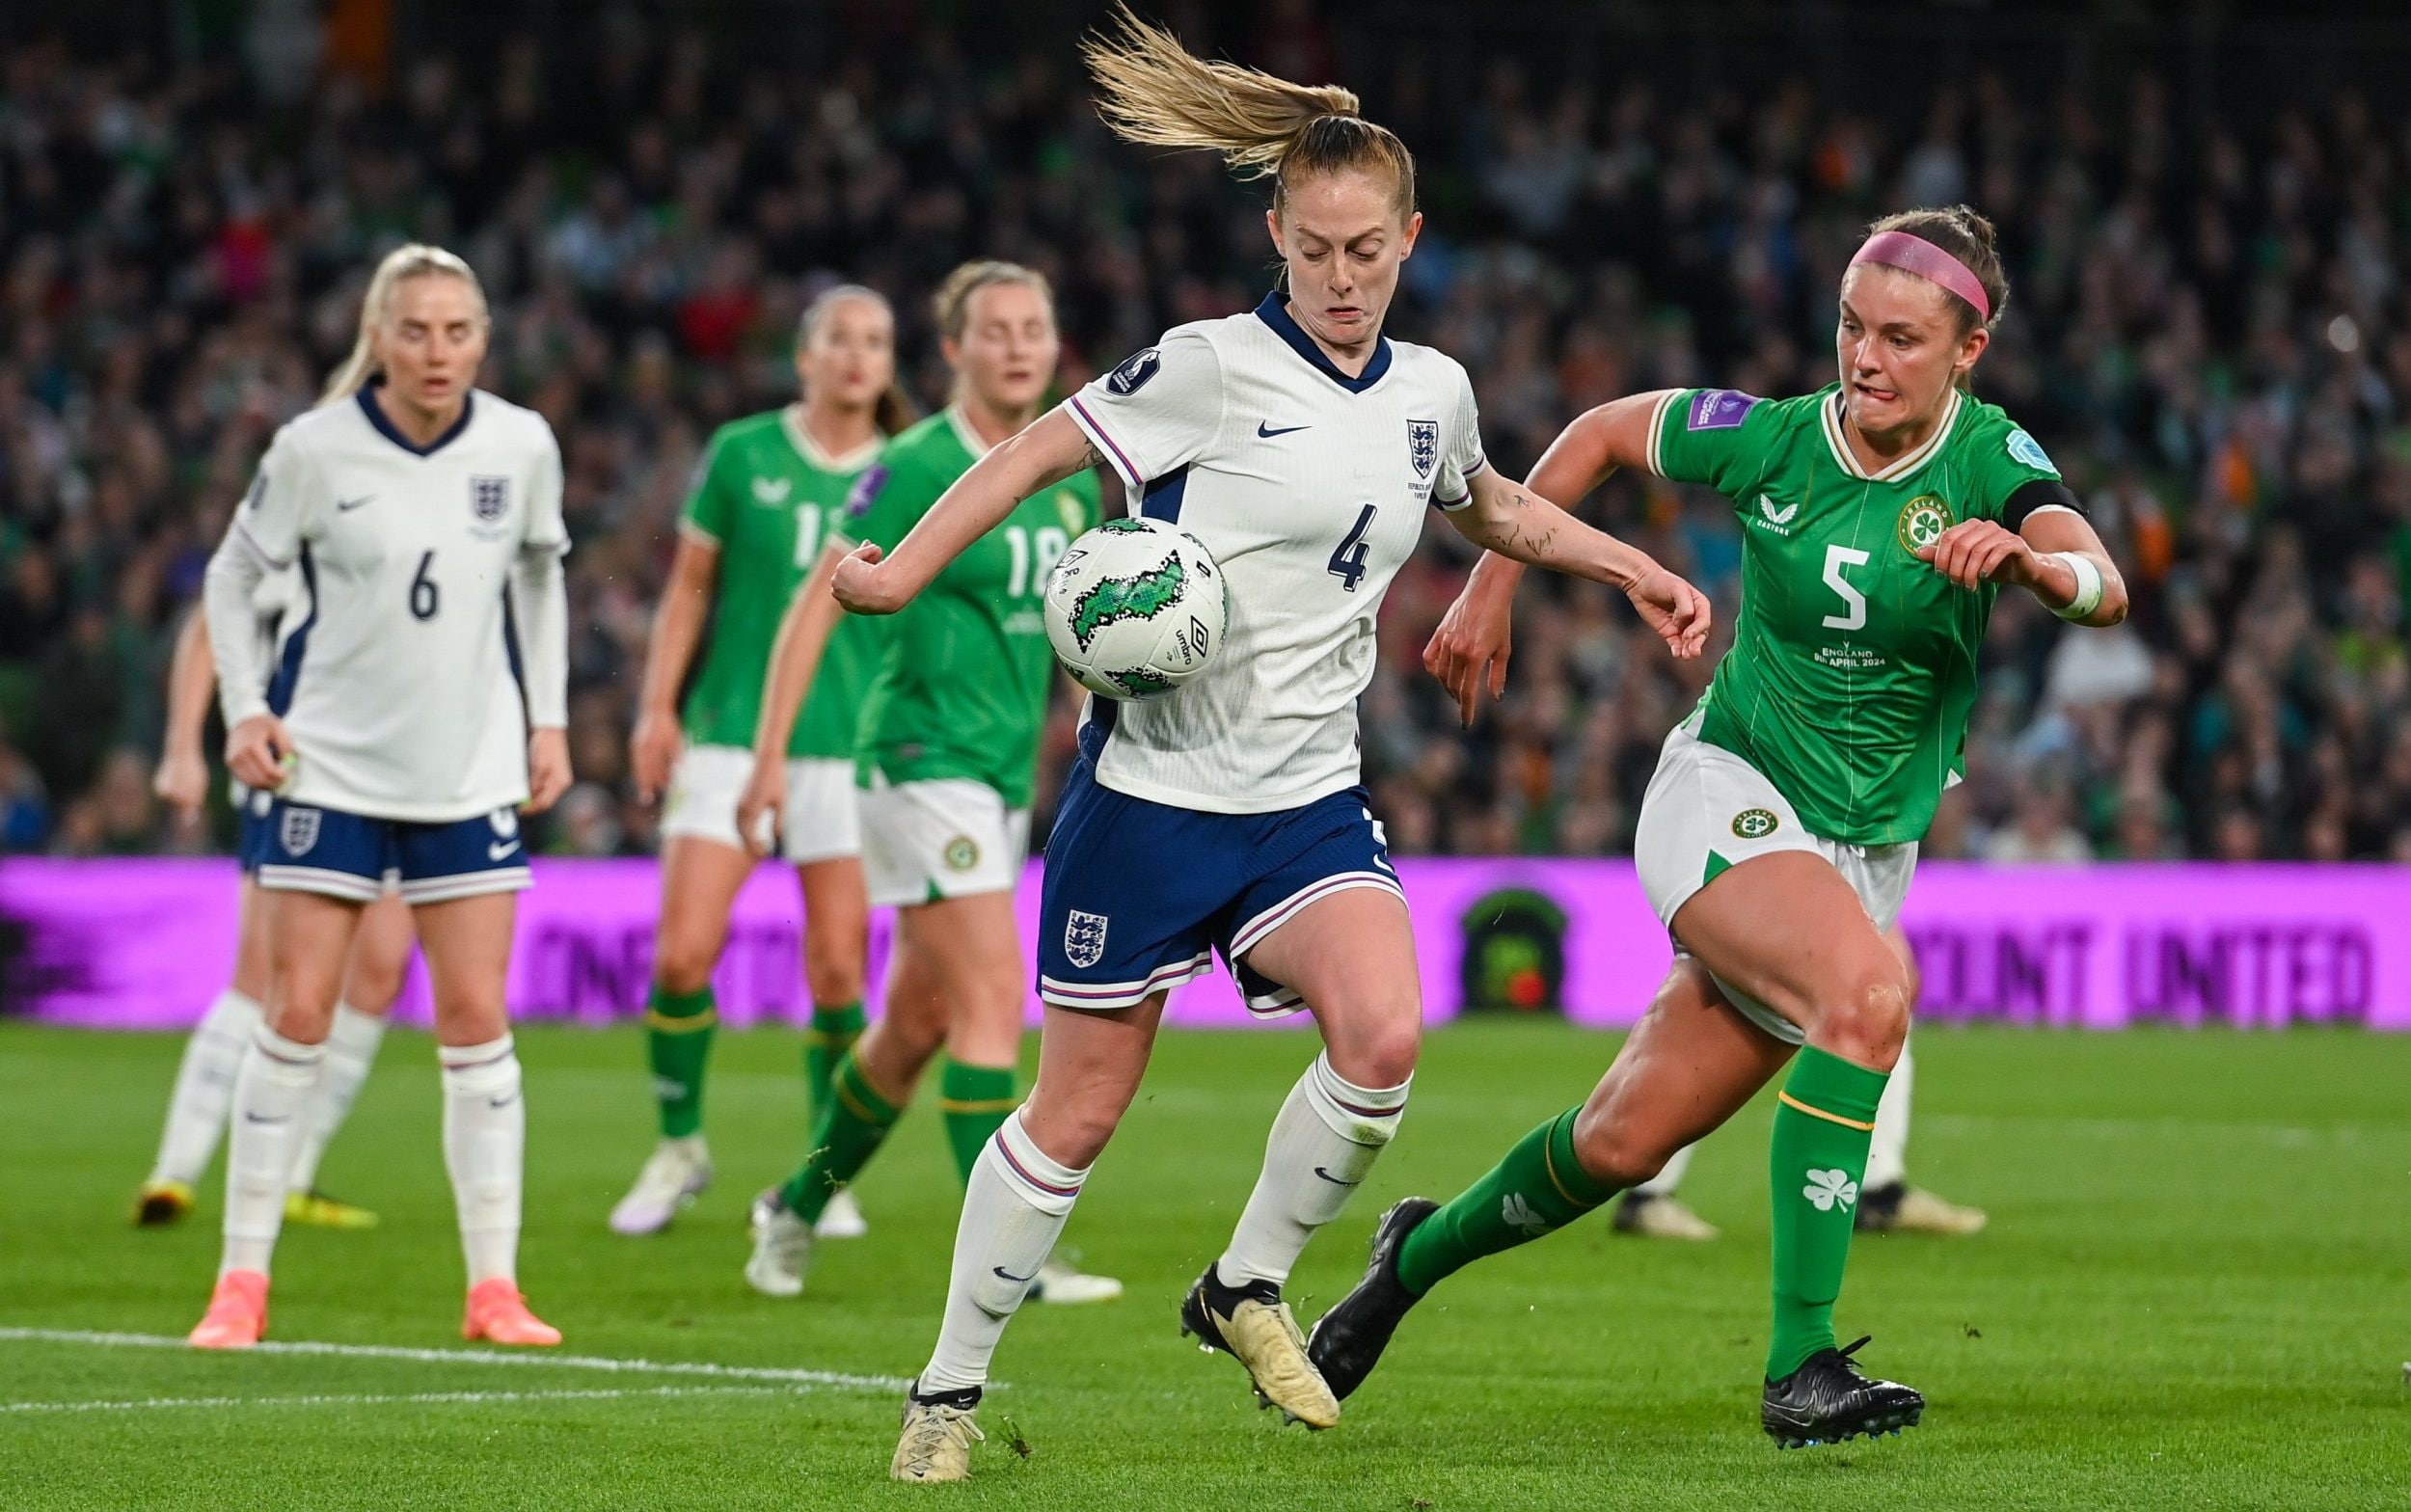 keira walsh is england’s biggest strength – but risks becoming a weakness